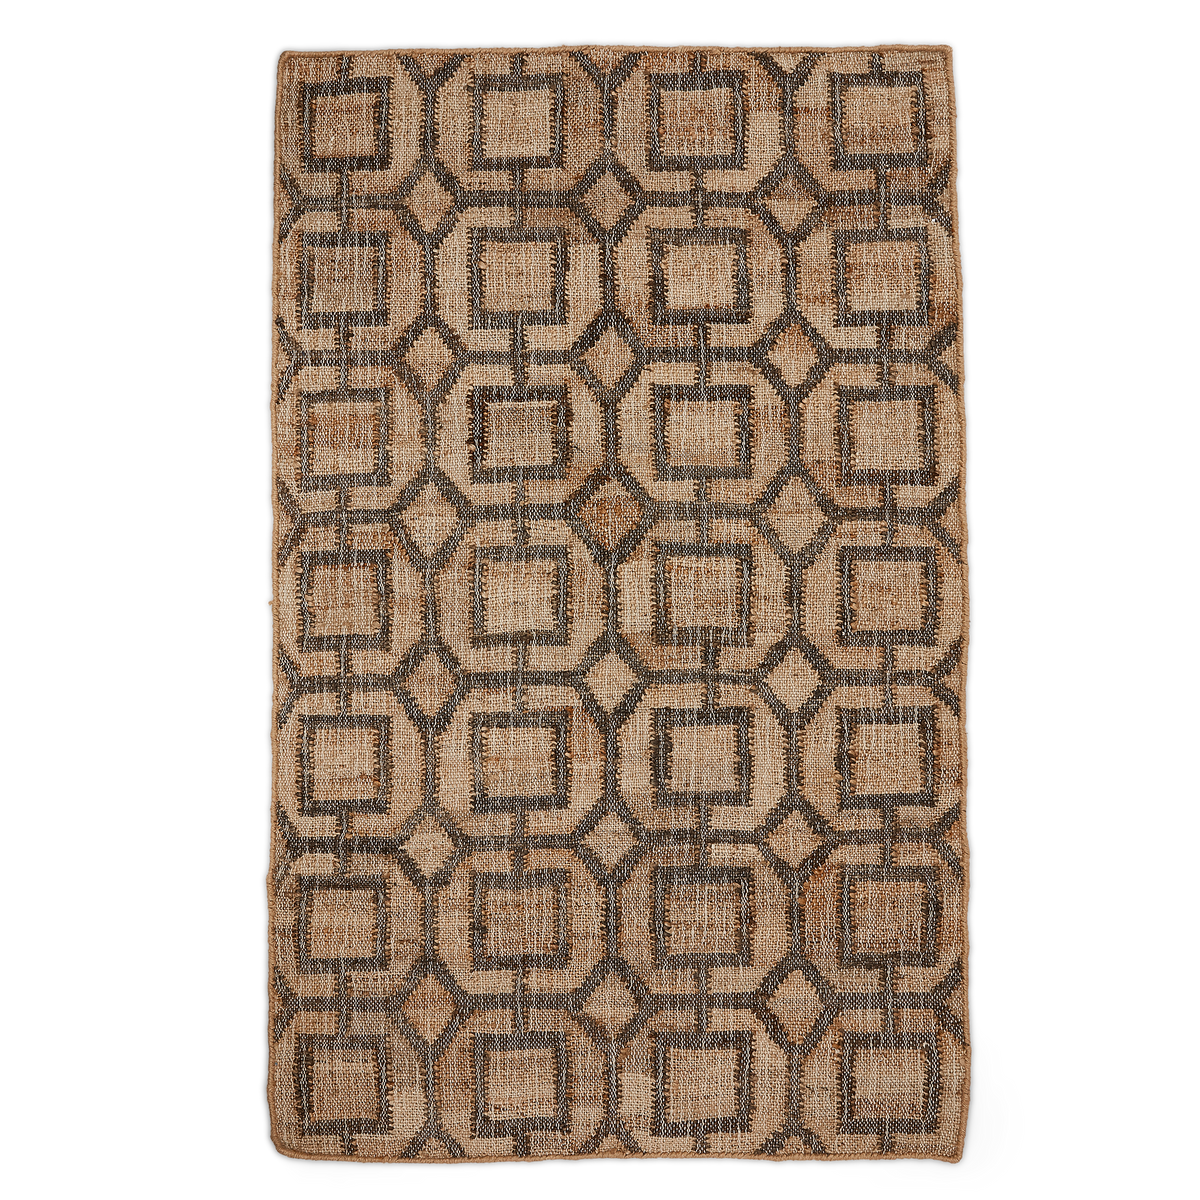 Top view, Fern hand-woven Jute and natural charcoal goemetric patterned rug.